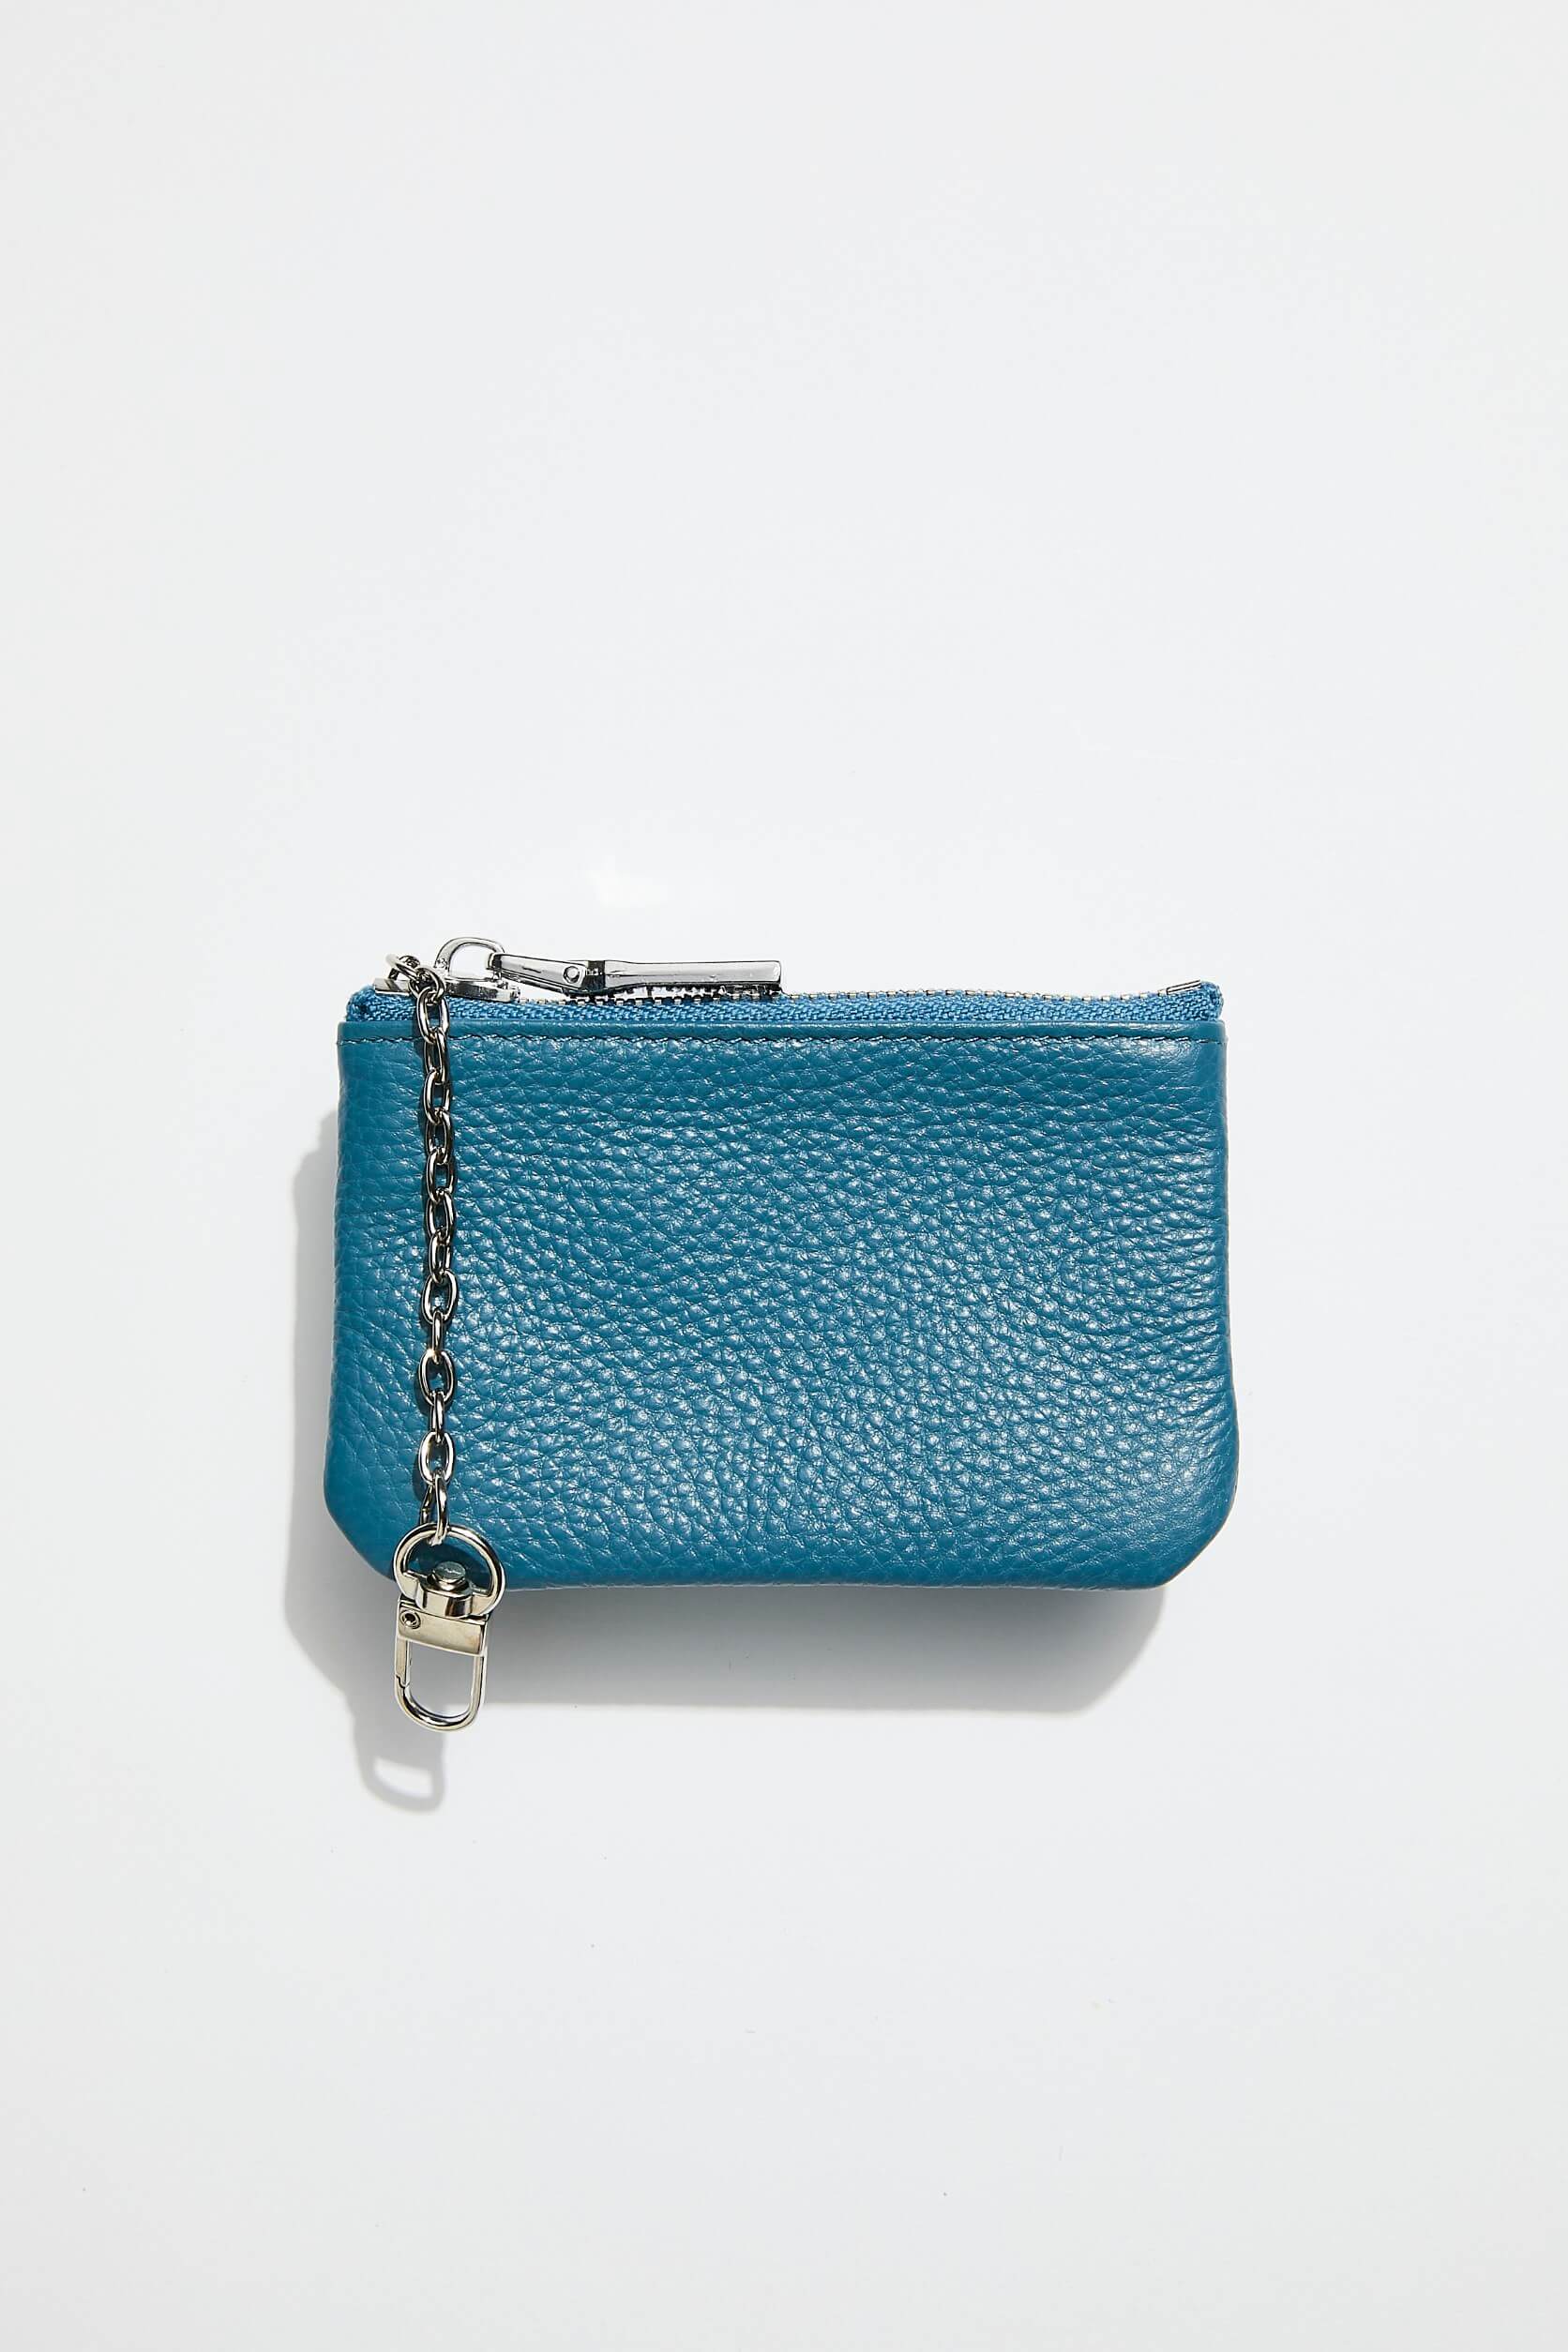 front view of mon purses' sky blue pebbled leather coin purse with silver zip and chain with clasp